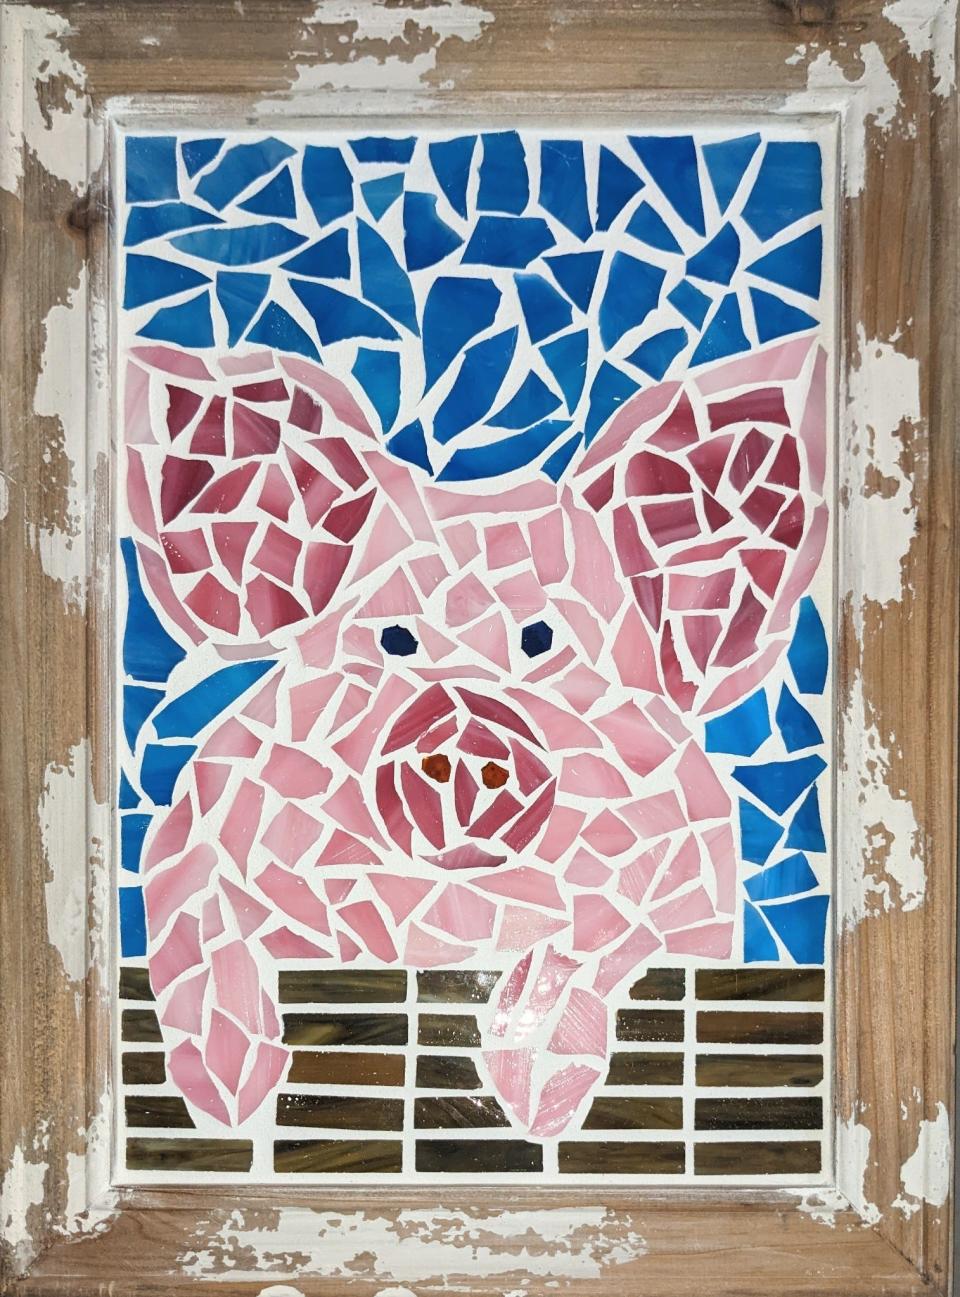 4-H Art Contest Best of Show winner ‘Piggy Mosiac,’ from the Any Other Media category by Austin Kreisa, age 13, Sheboygan County.